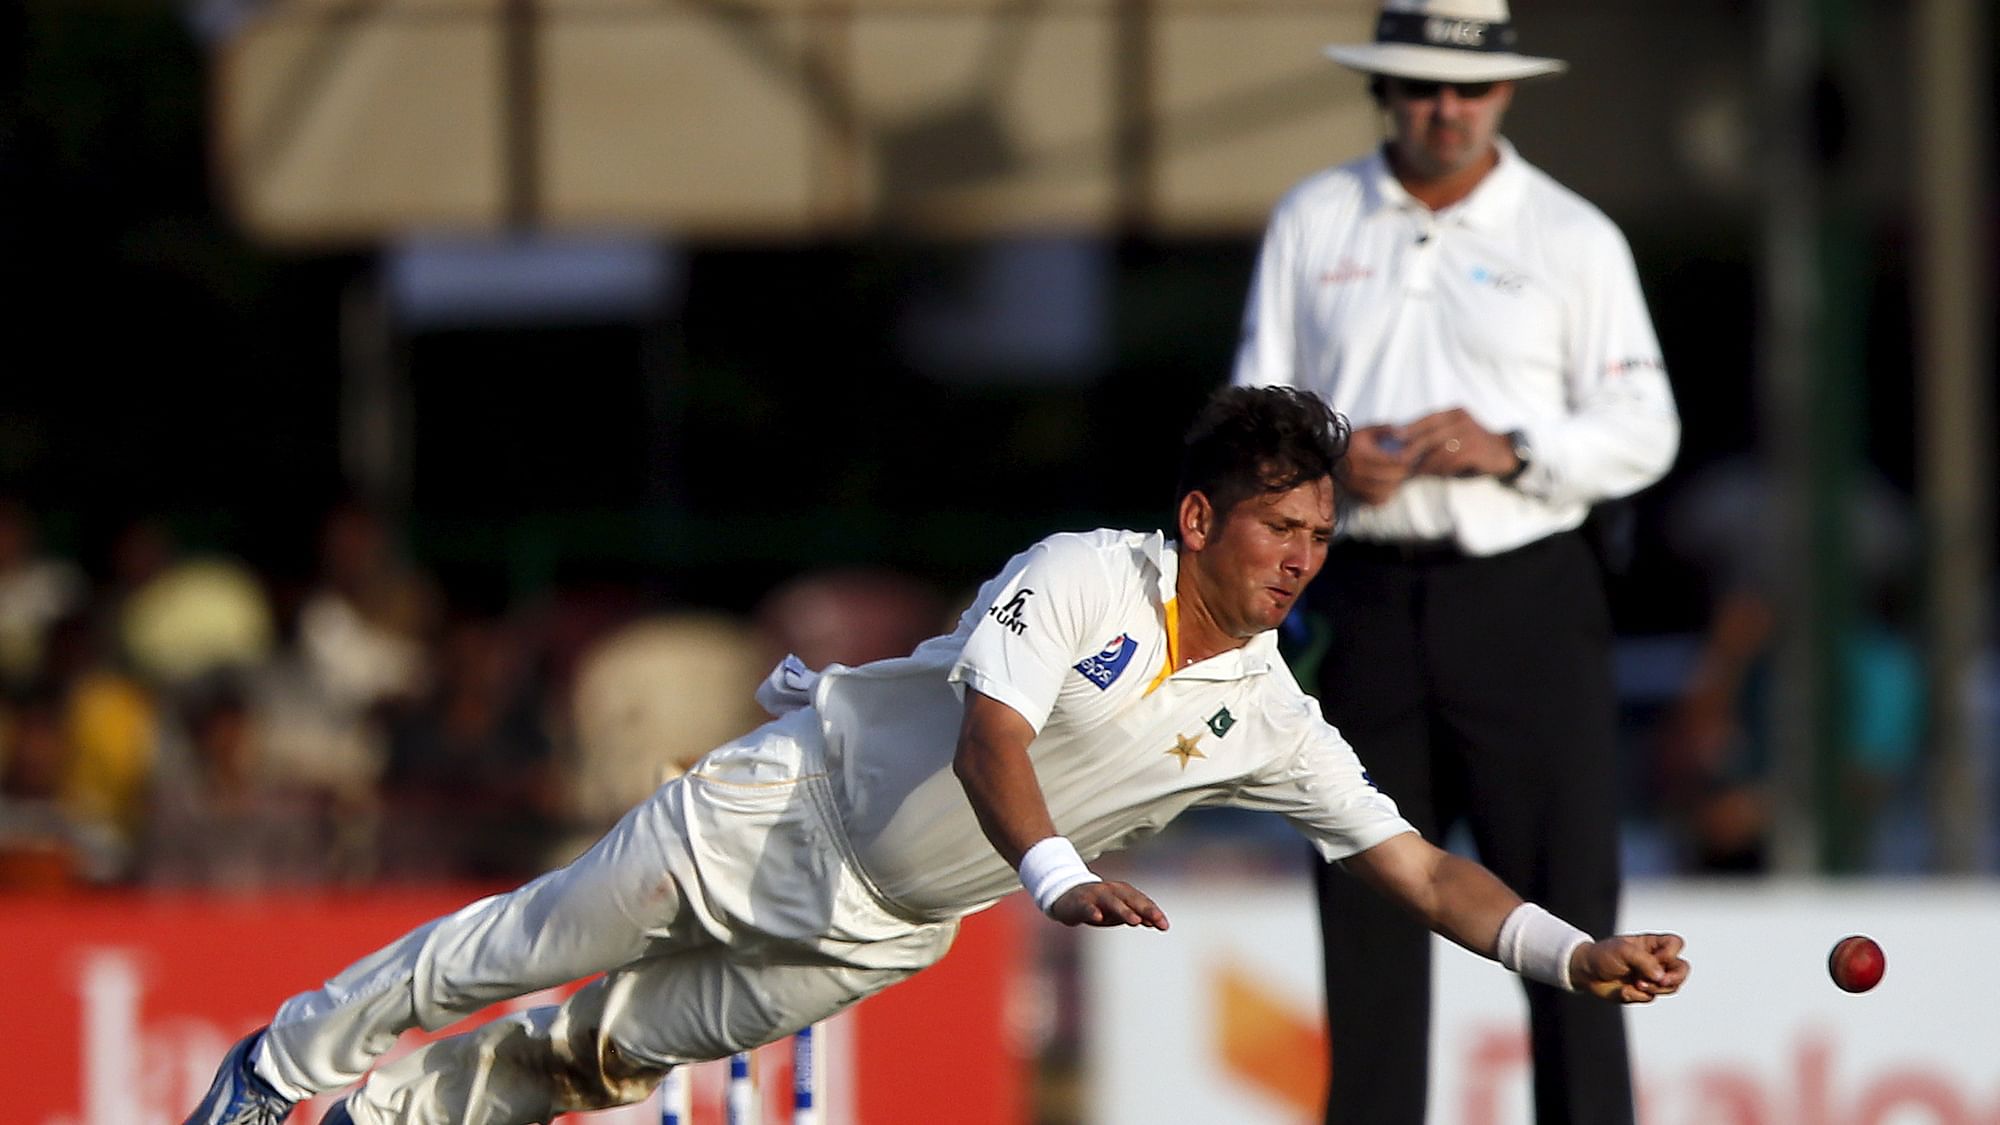 Charged under the Anti-Doping code, Pakistan leg-spinner Yasir Shah has been provisionally suspended by the ICC